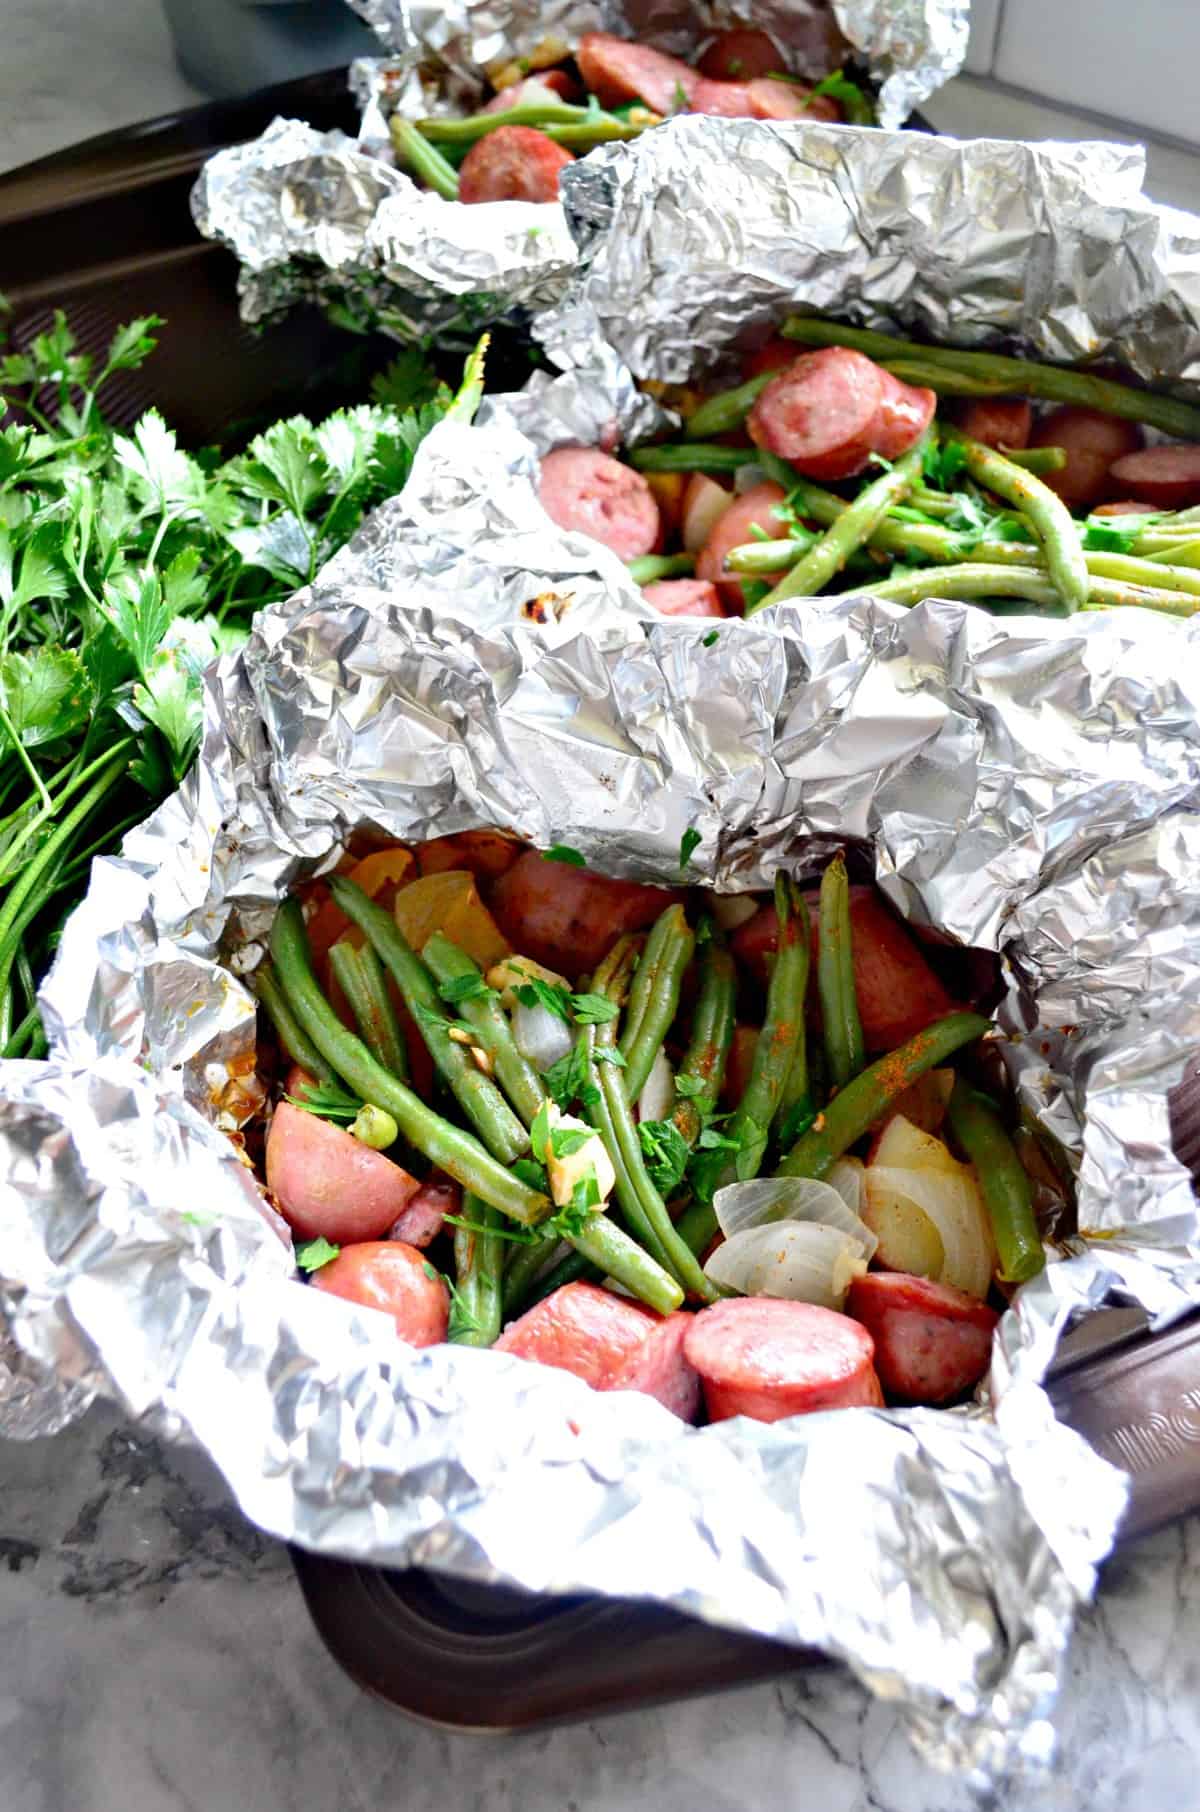 Grilled Kielbasa, Potato, green beans, and parsley in Foil Packets next to fresh parsley.